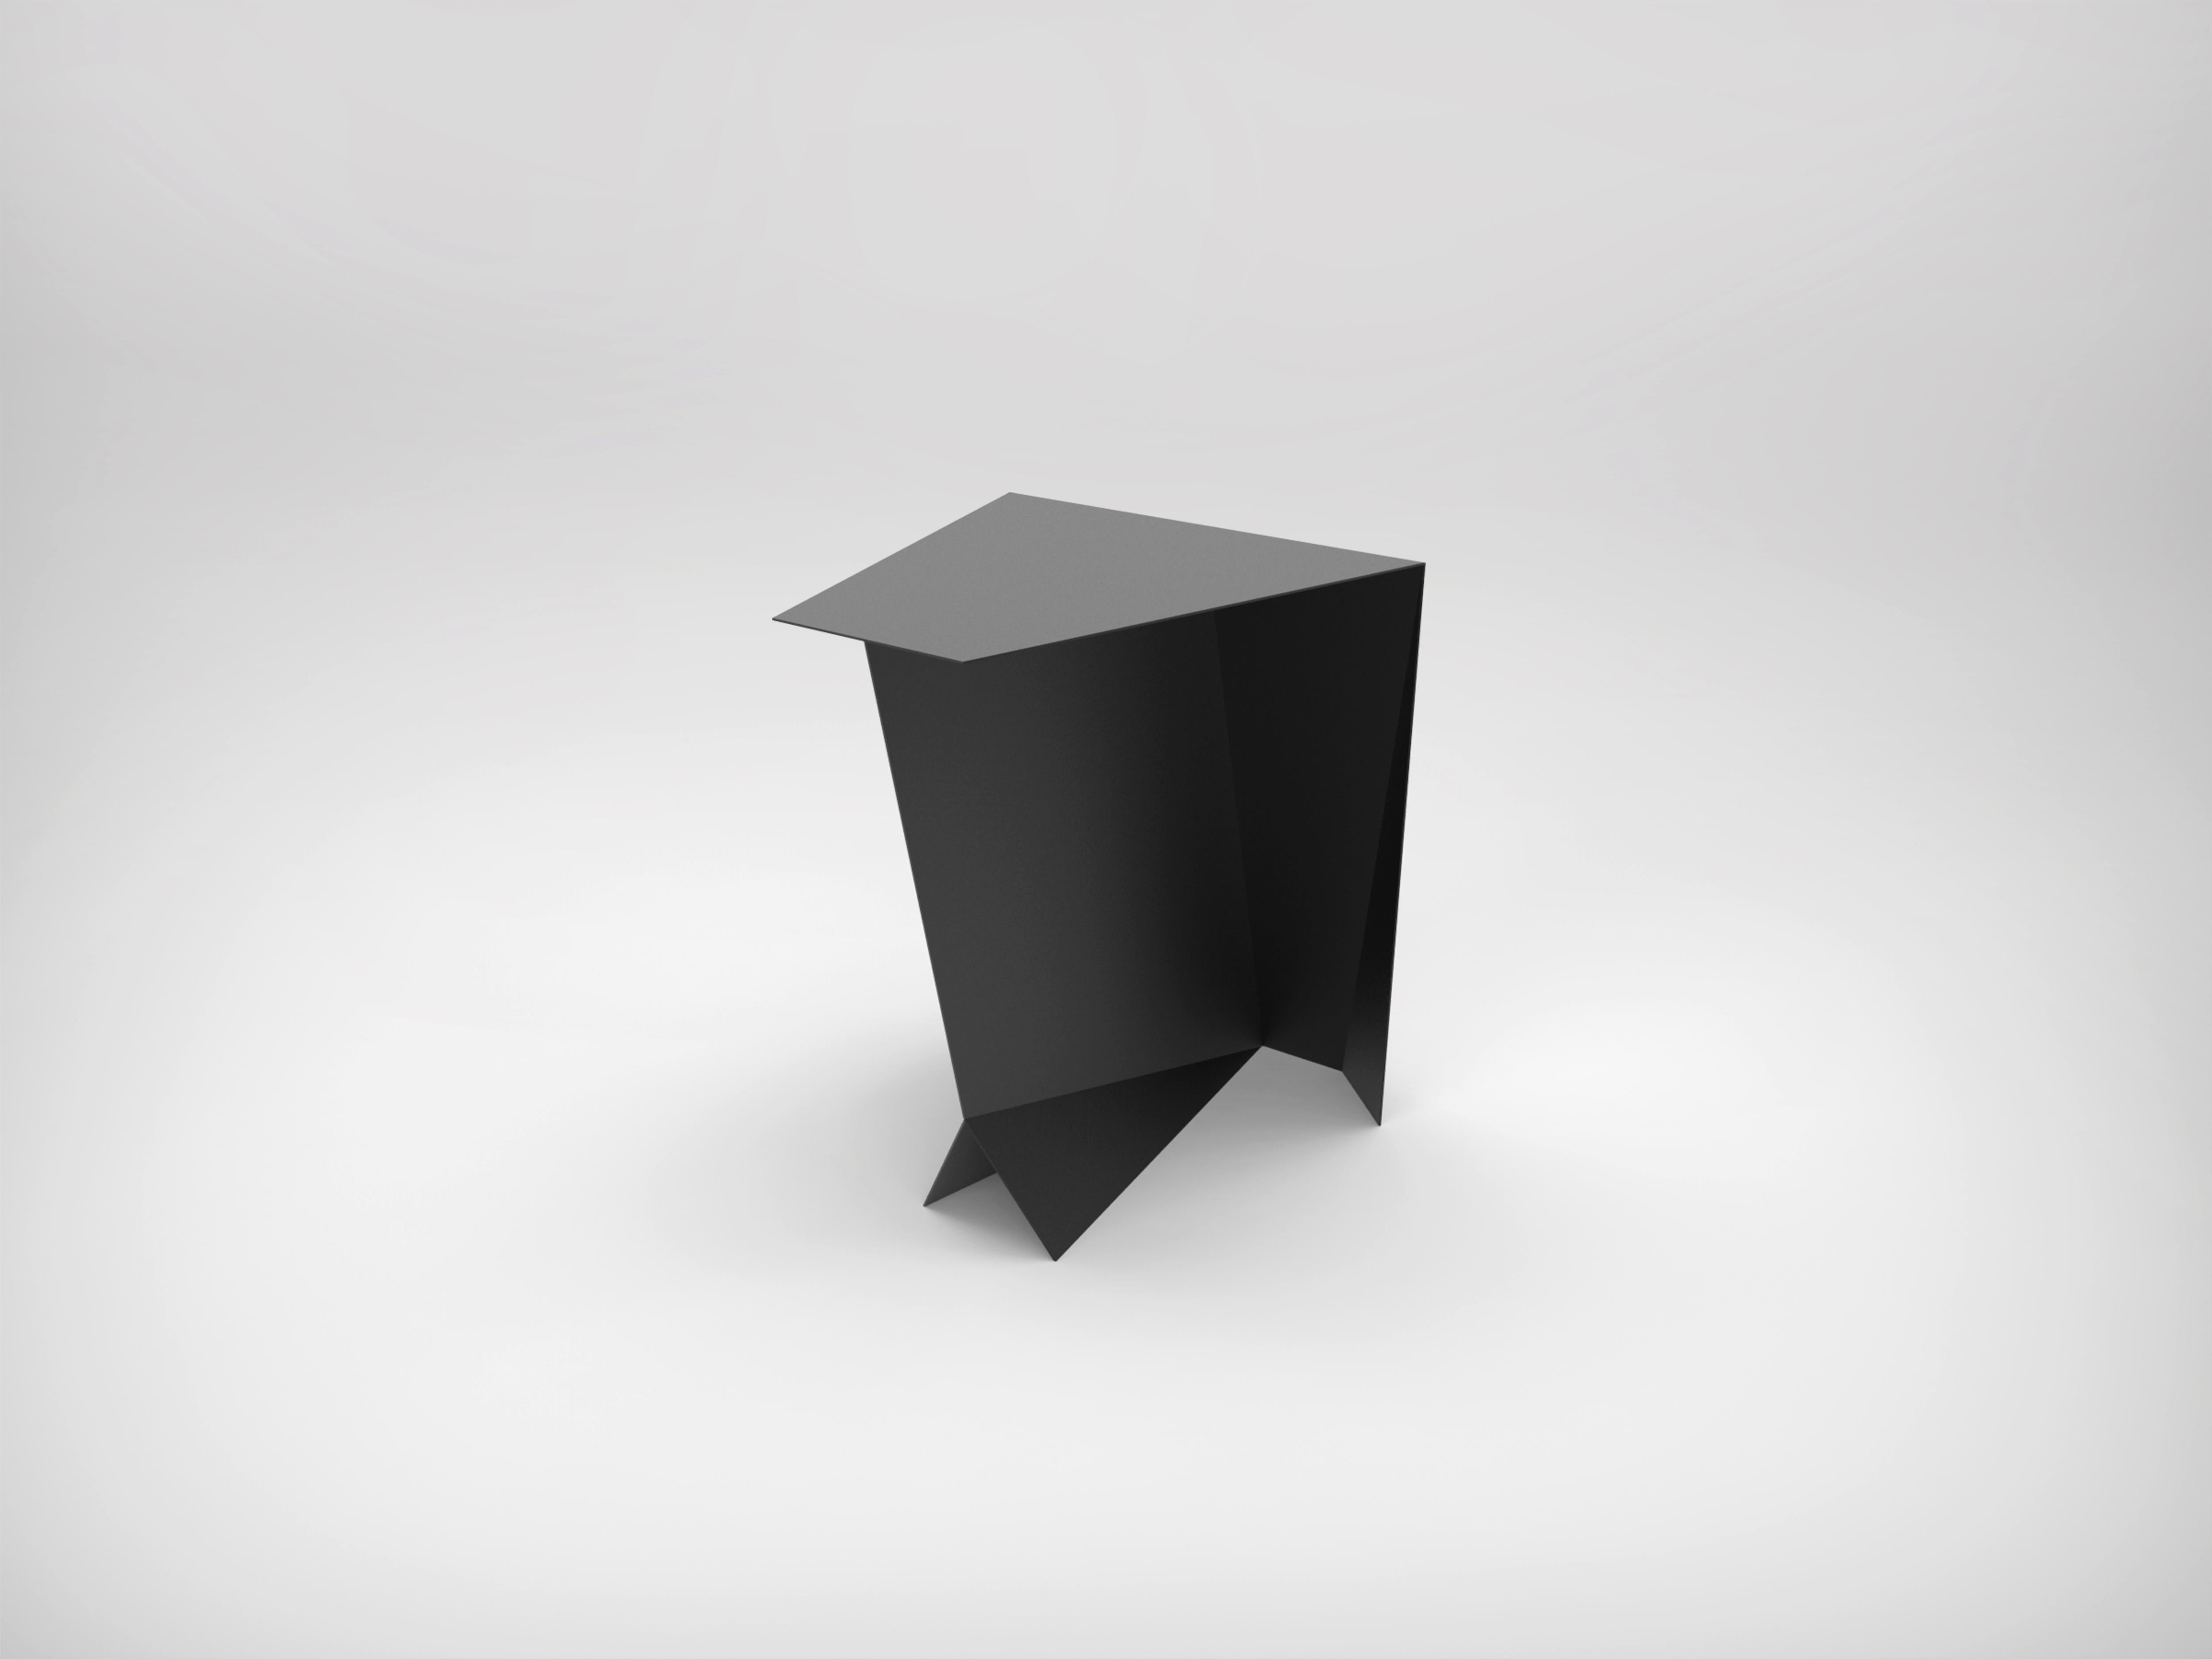 Perseus side table is conceived by 06d design studio

Black steel. Matt finish.
55 x 43 x 43 cm

Limited edition of 33 pieces